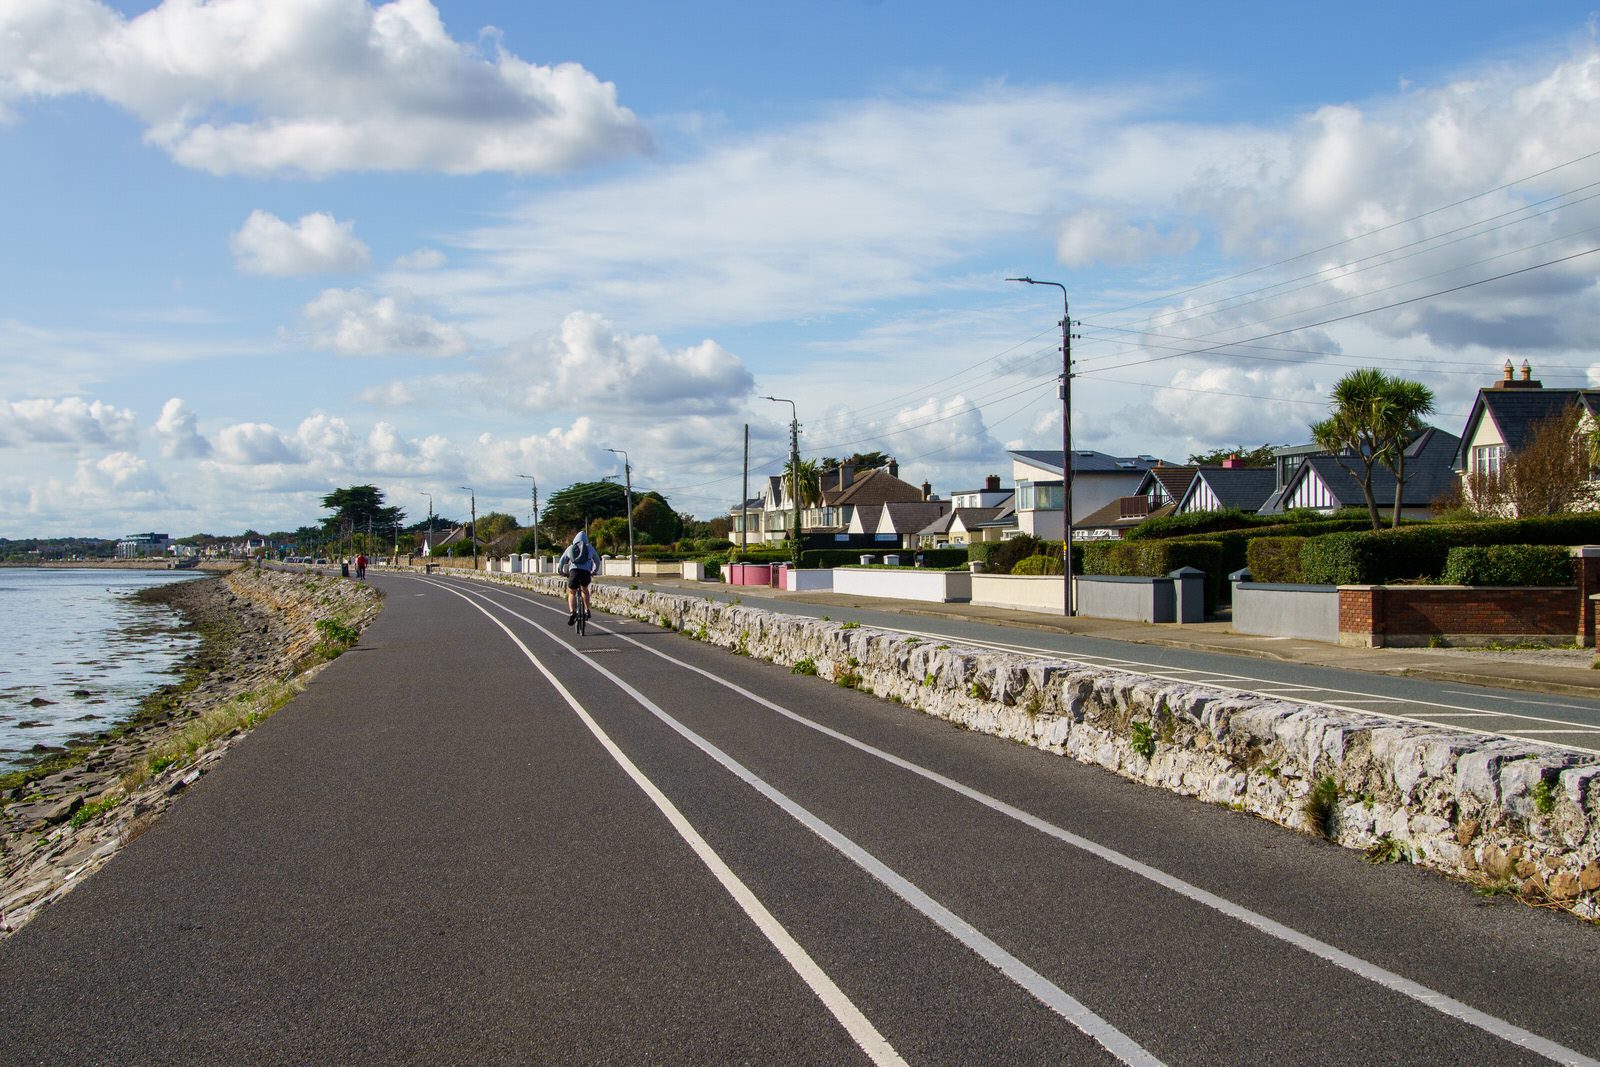 MY FIRST TIME TO WALK ALONG THIS SECTION OF THE SEAFRONT ALONG THE DUBLIN ROAD IN SUTTON